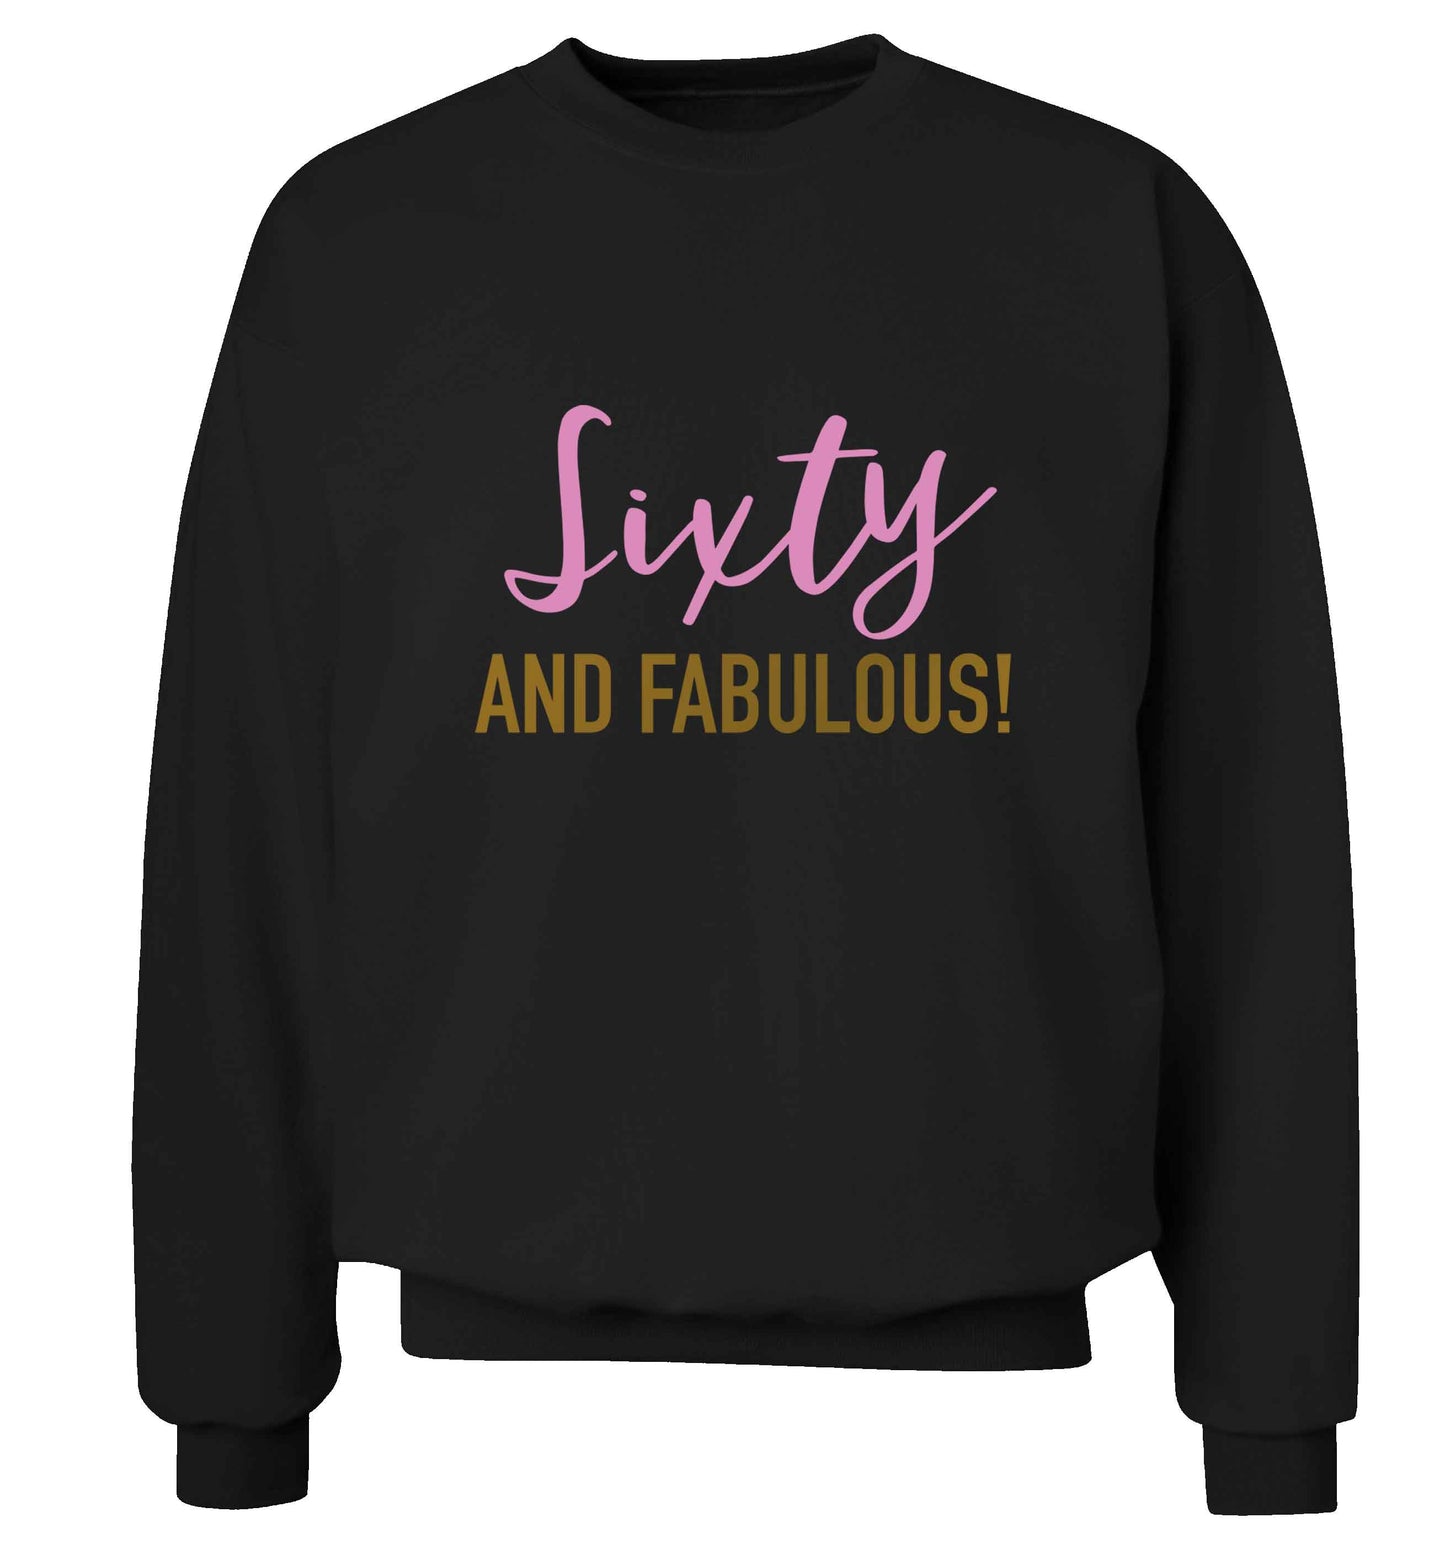 Sixty and fabulous adult's unisex black sweater 2XL